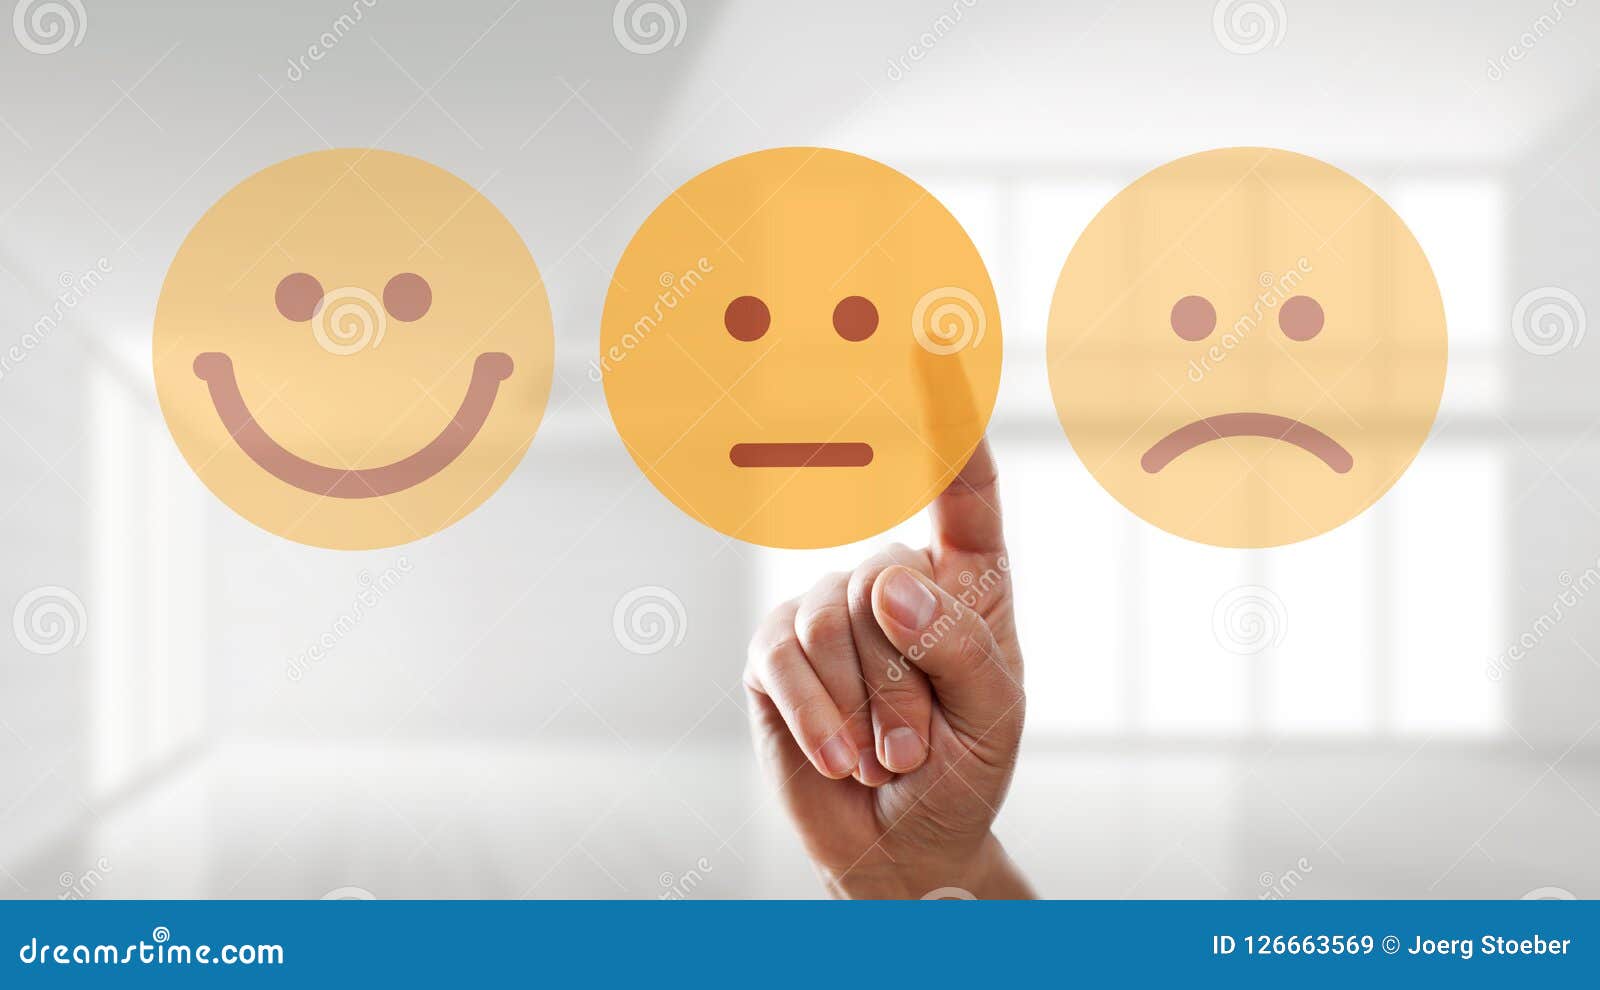 hand is selecting a neutral mood smiley